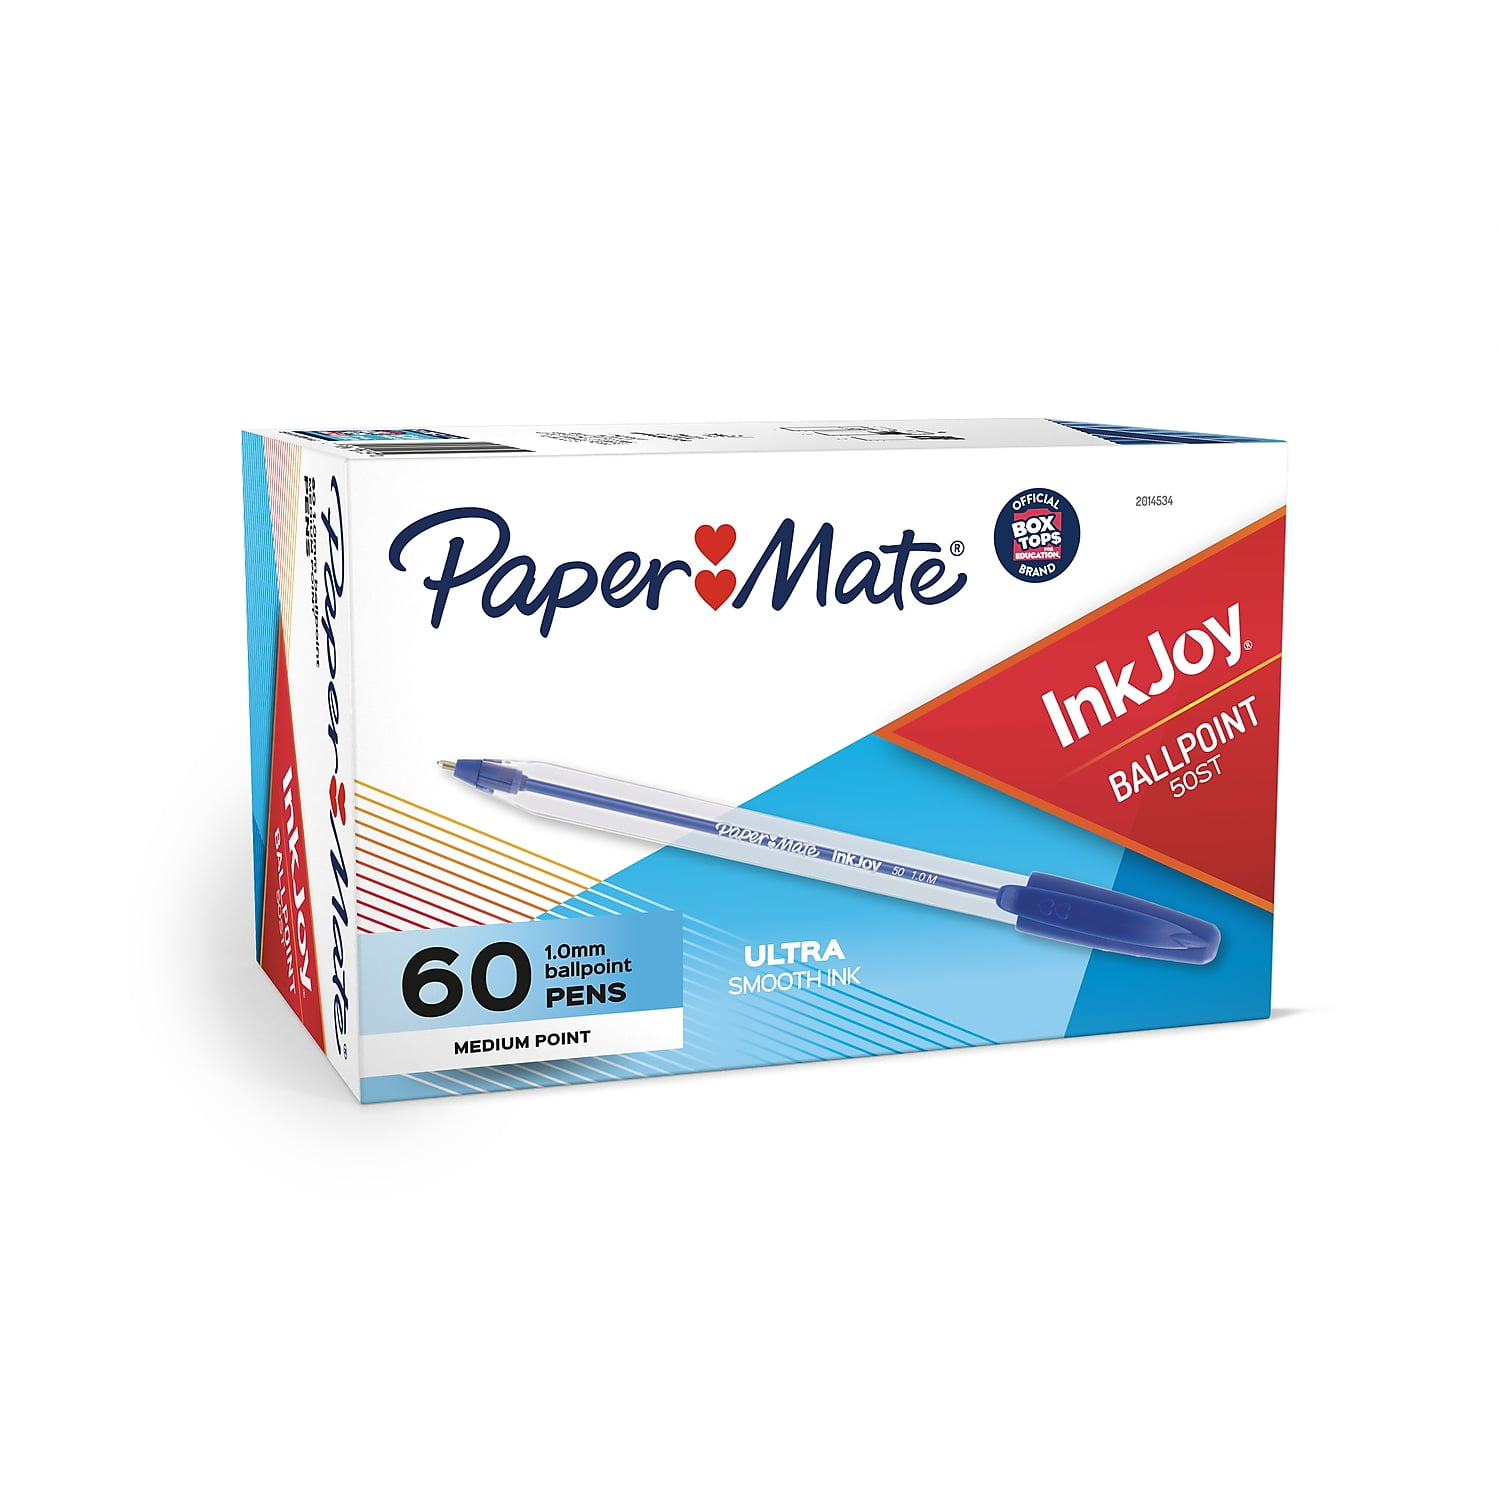 Blue Medium Point Paper Mate InkJoy 50ST Ballpoint Pens New 12 Count 1.0mm 